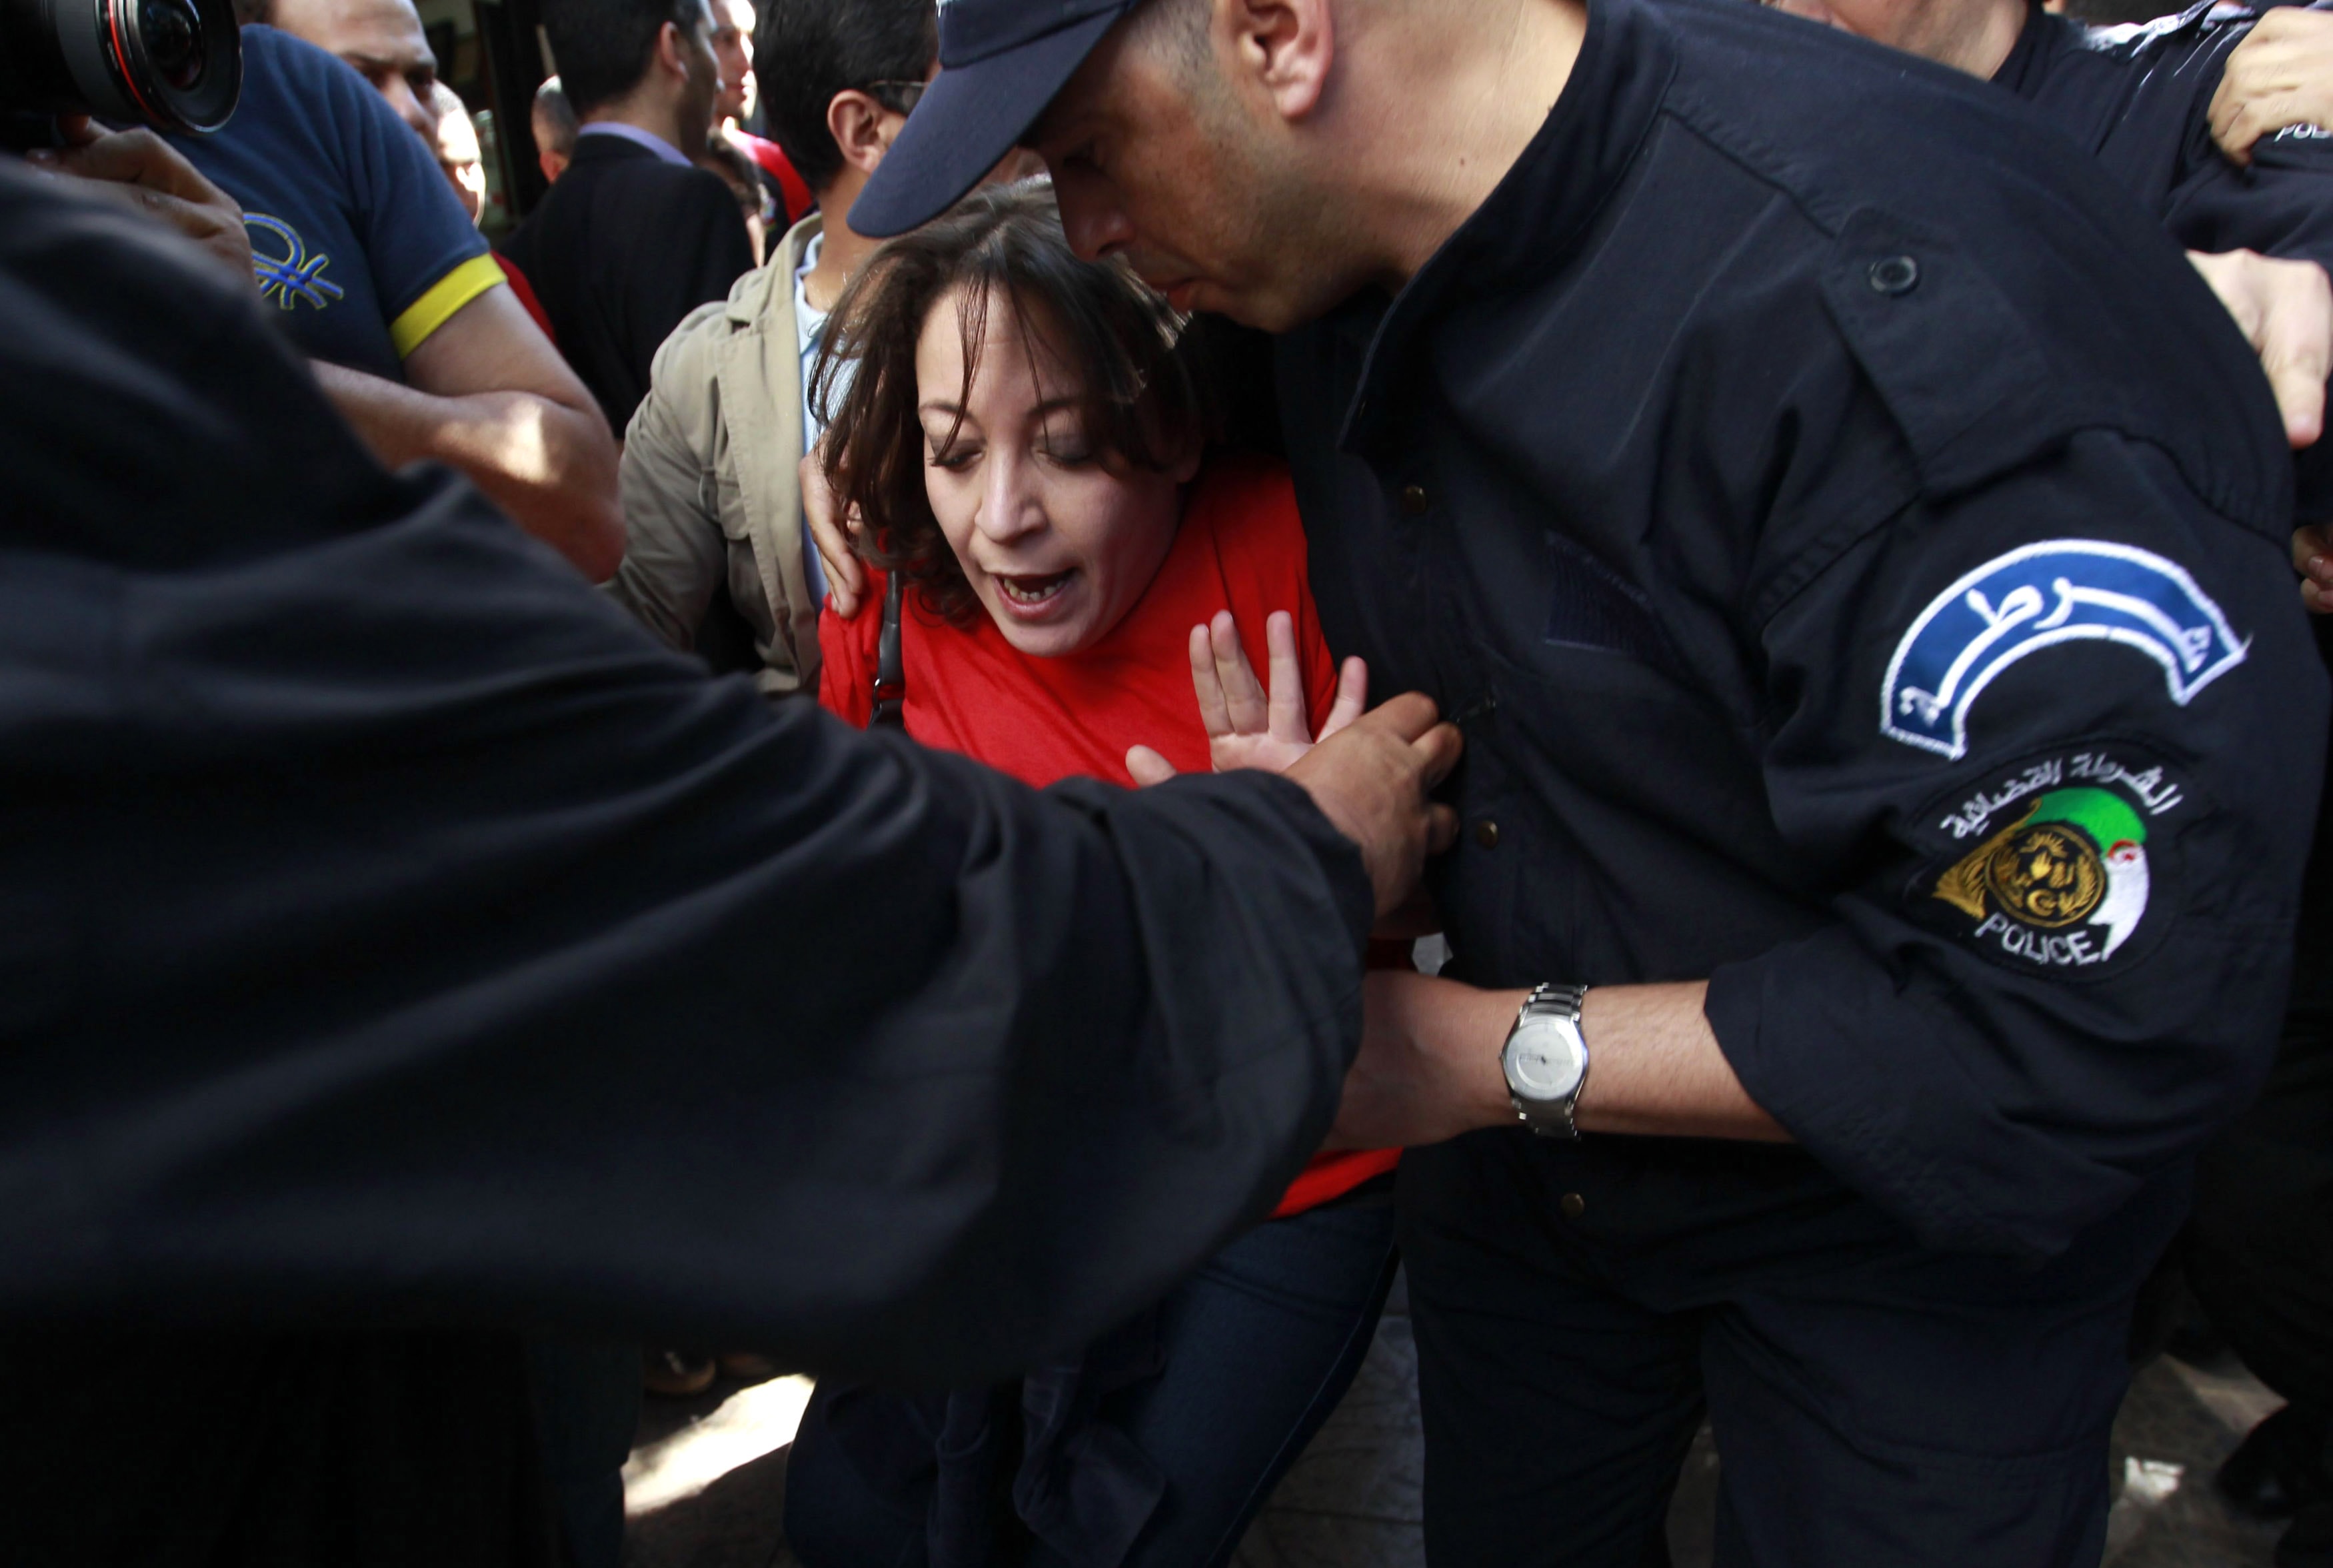 Police officers detain Amira Bouraoui leader of the "Barakat" (Enough) movement during a demonstration against election and Algerian President Abdulaziz Bouteflika's decision to run for a fourth term, in Algiers on 16 April 2014, REUTERS/Louafi Larbi